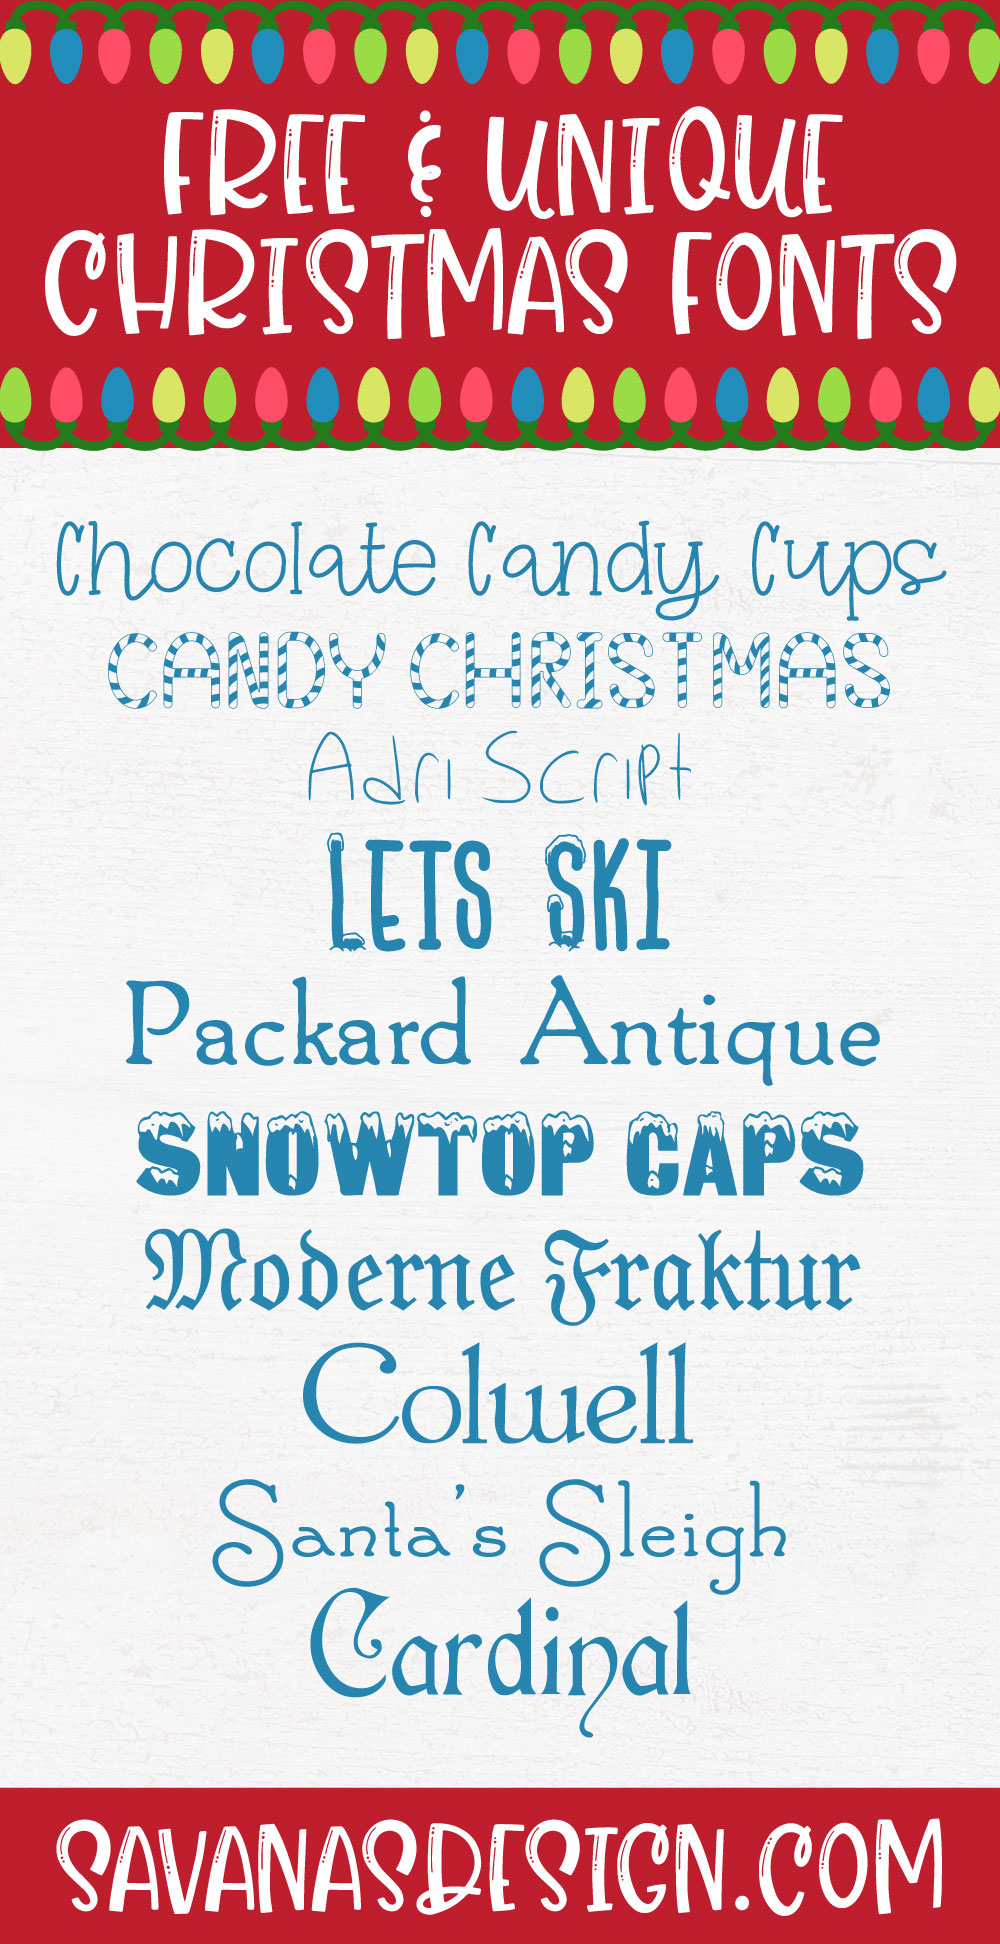 Free and Unique Christmas Fonts